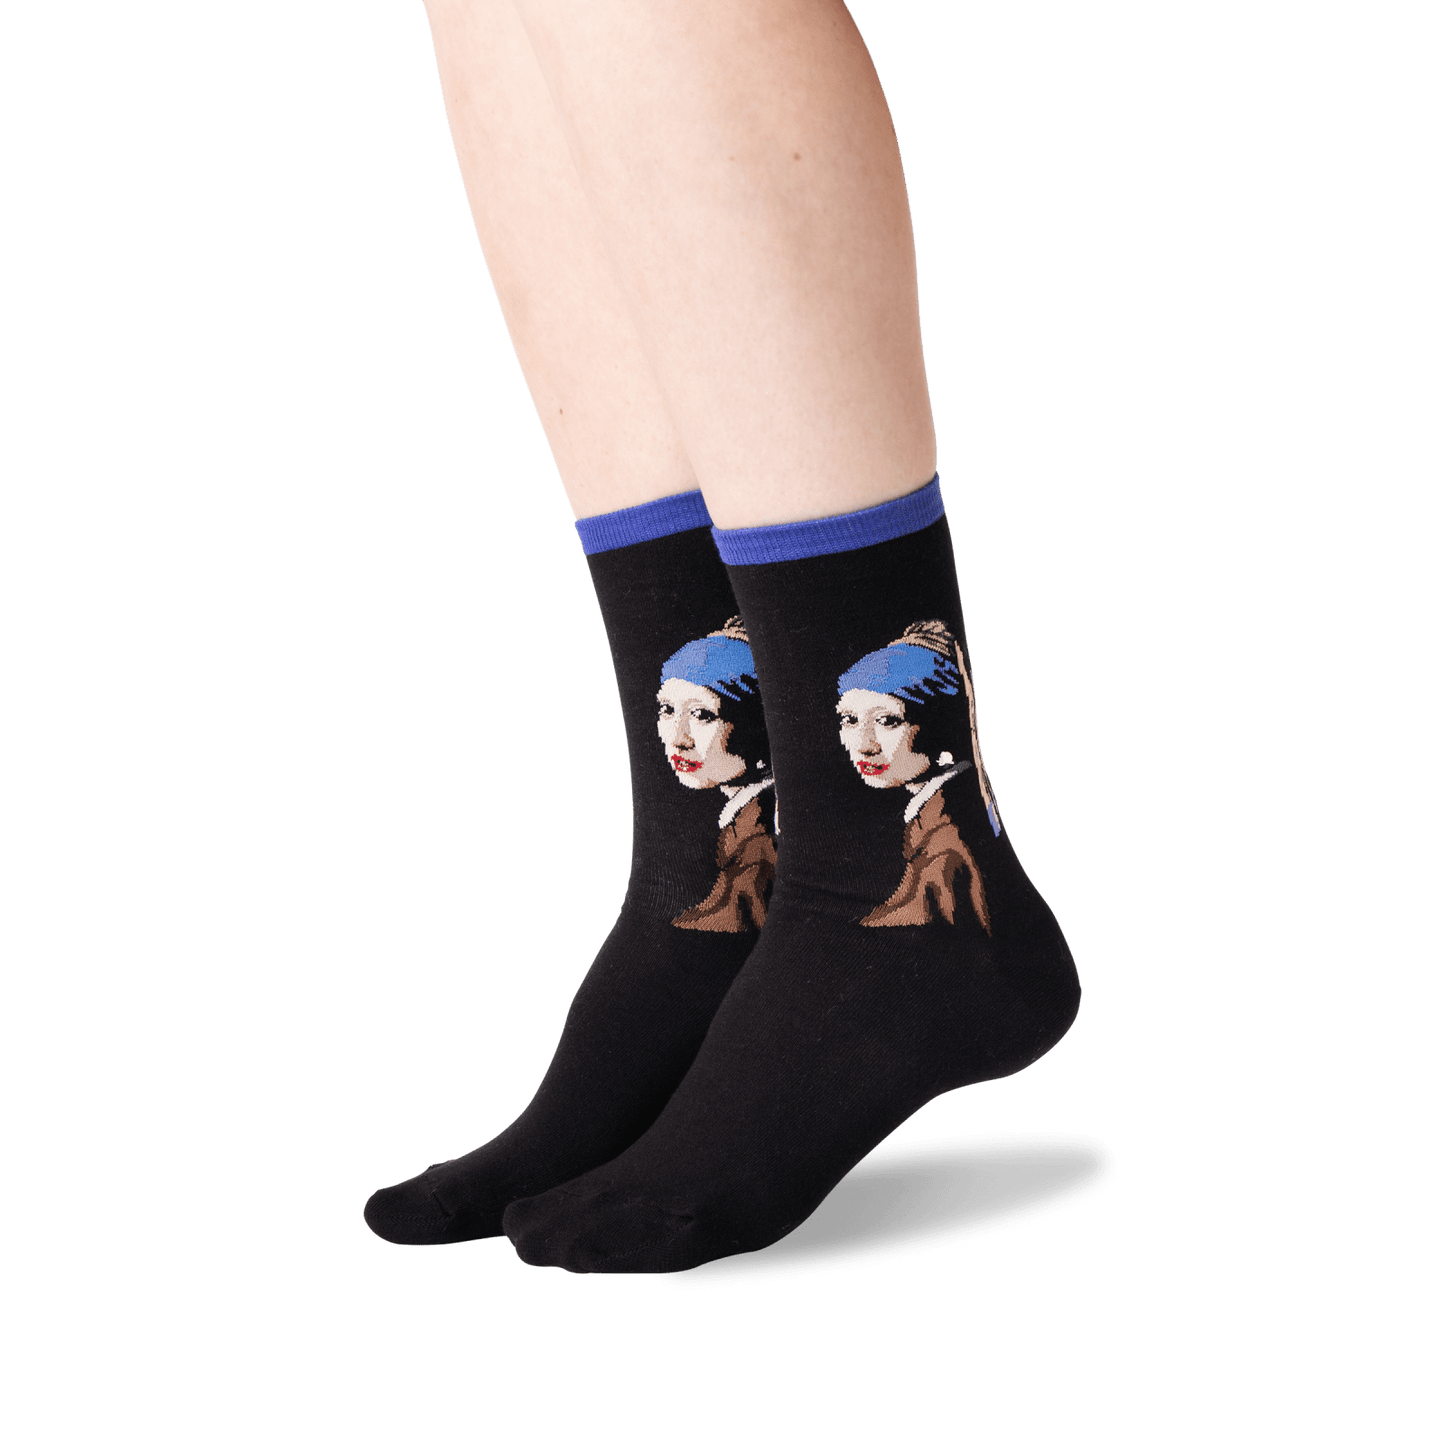 Socks: Women's - Girl with Pearl - Blue Top